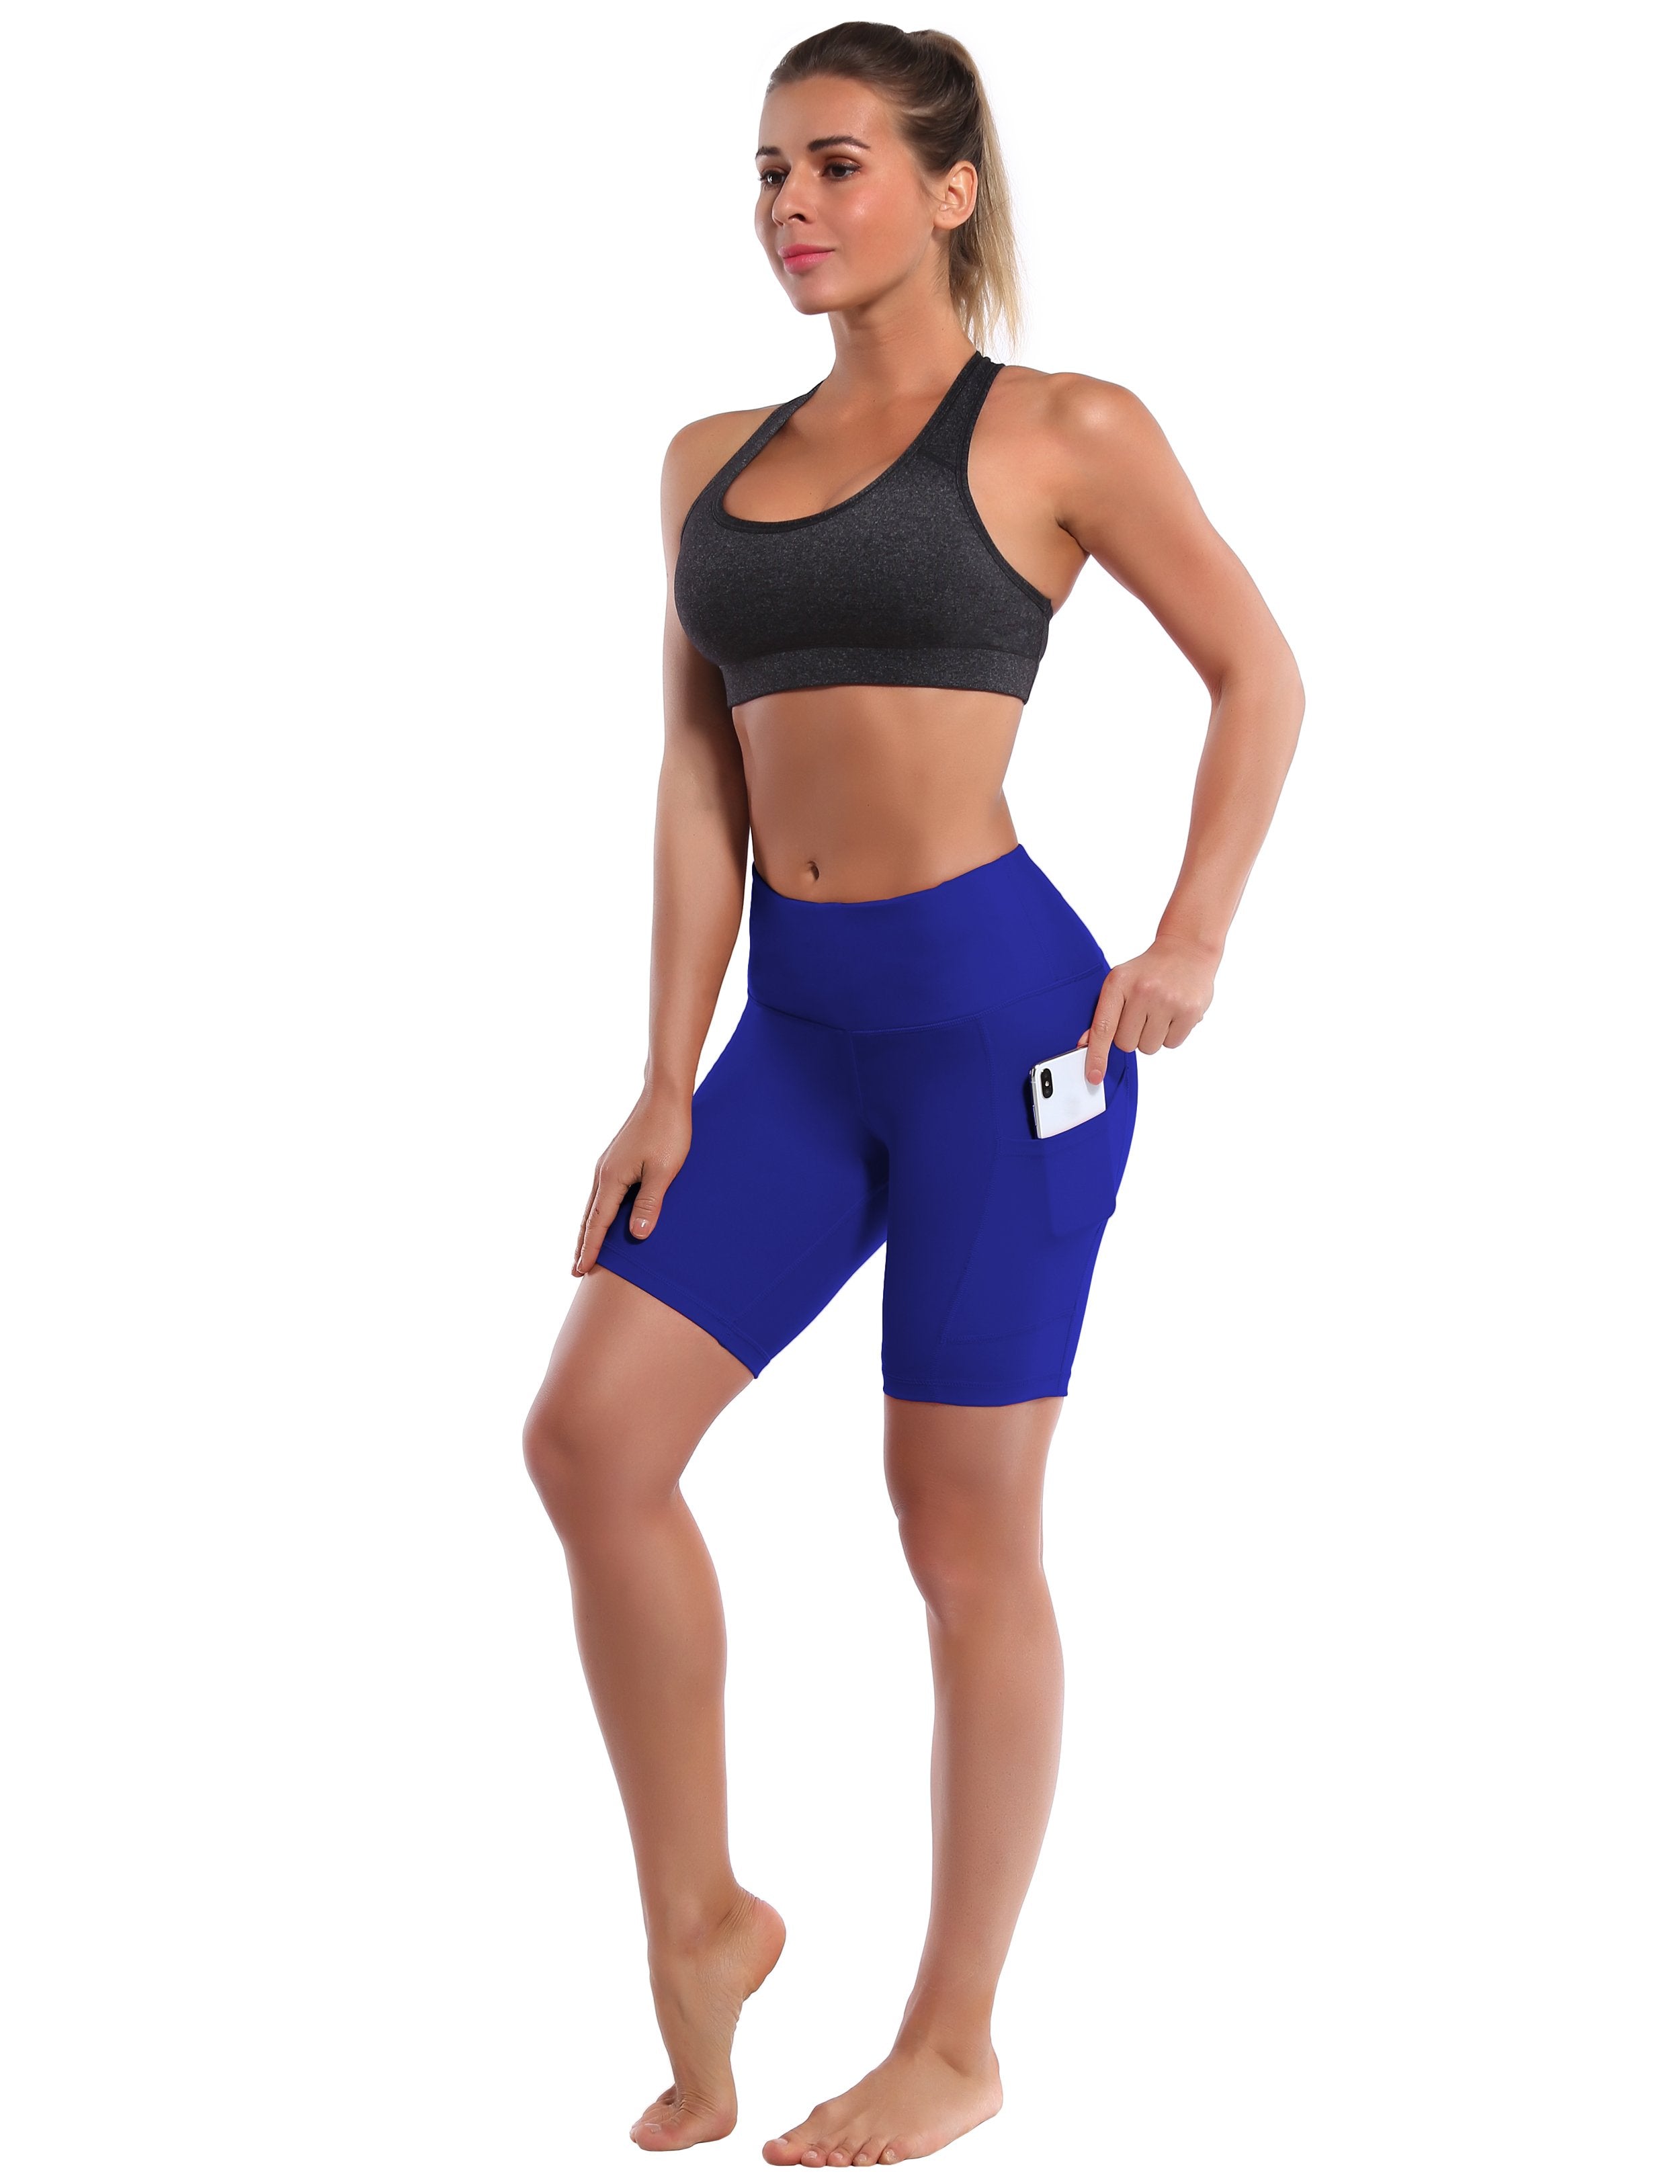 8" Side Pockets Golf Shorts navy Sleek, soft, smooth and totally comfortable: our newest style is here. Softest-ever fabric High elasticity High density 4-way stretch Fabric doesn't attract lint easily No see-through Moisture-wicking Machine wash 75% Nylon, 25% Spandex